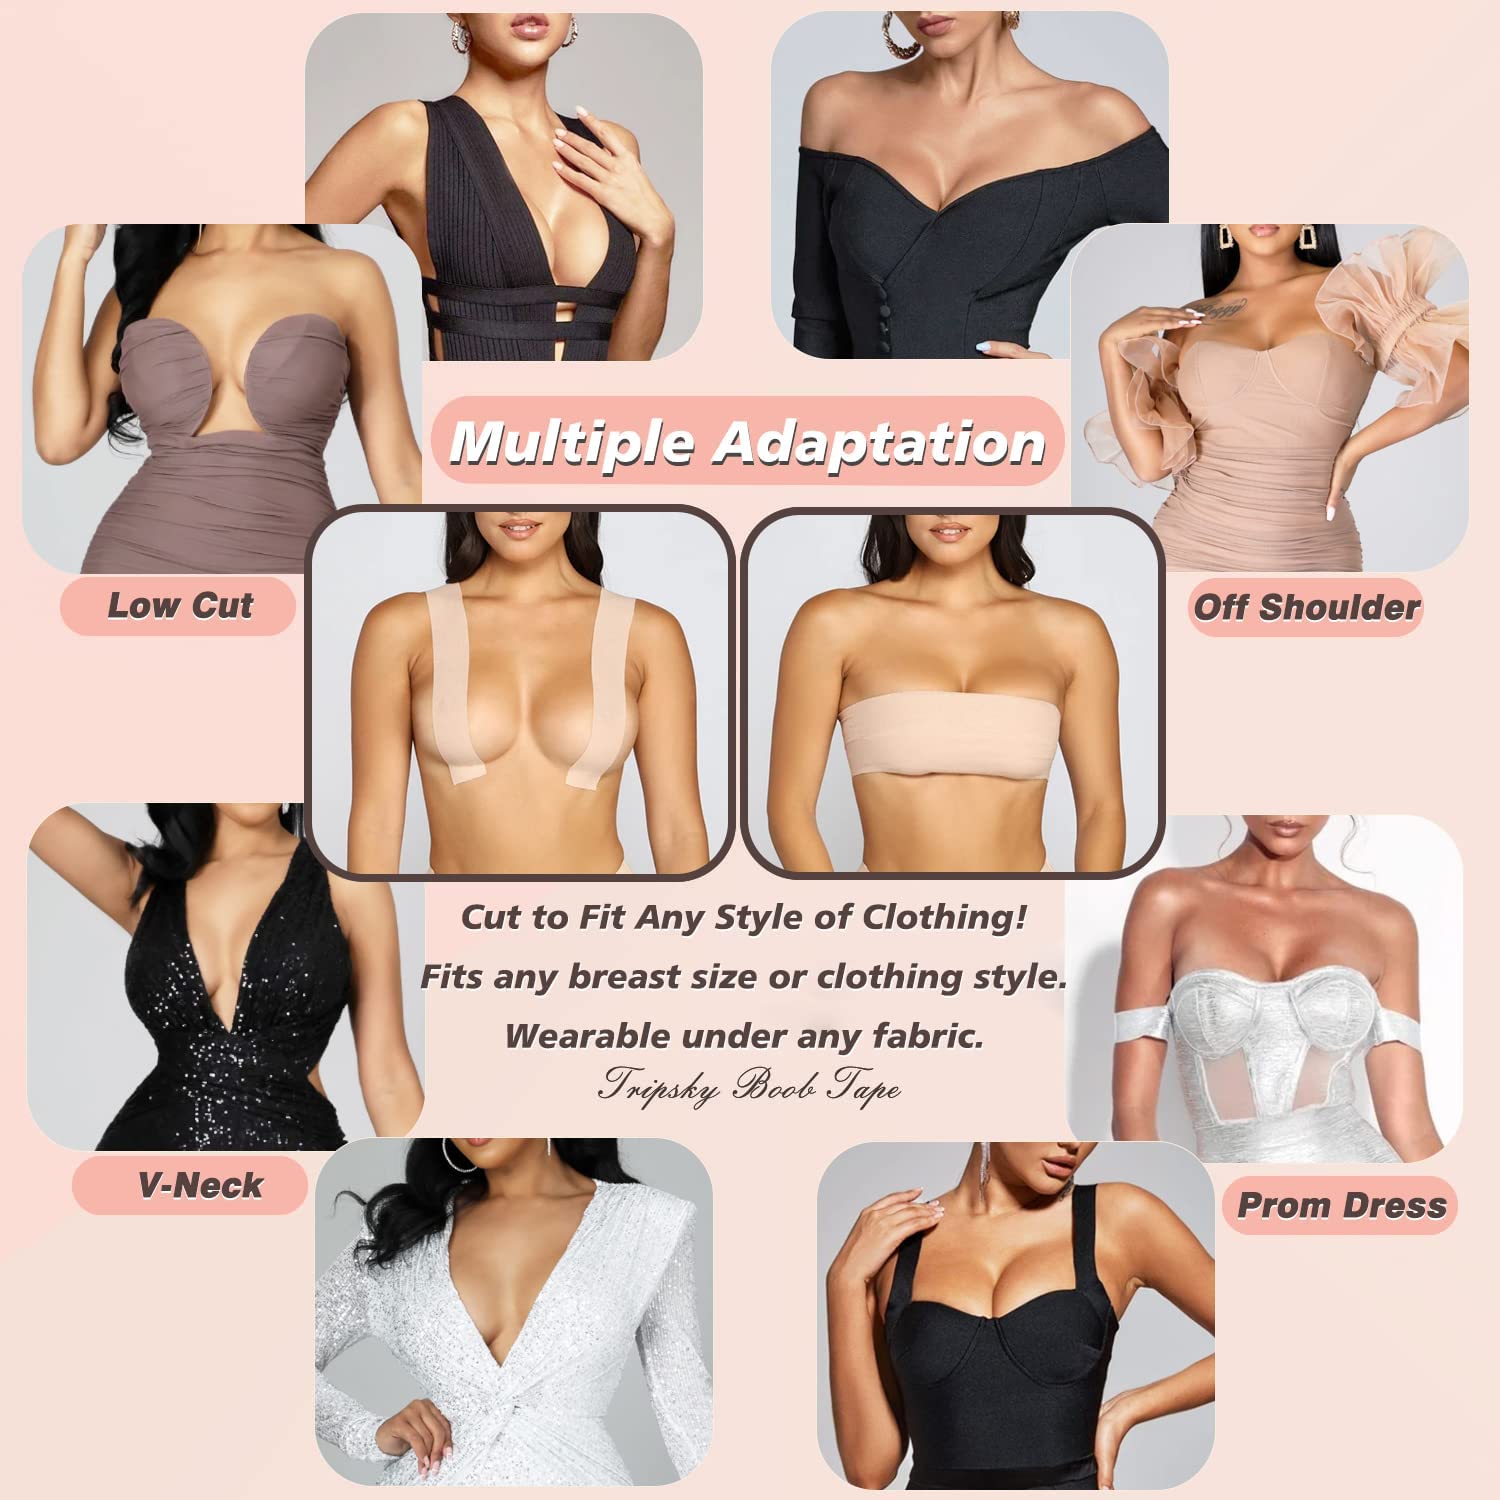 Boob Tape Waterproof Sticky Boobytape Boob Tape for Large Breast Lift Plus  Size from A to E Cup